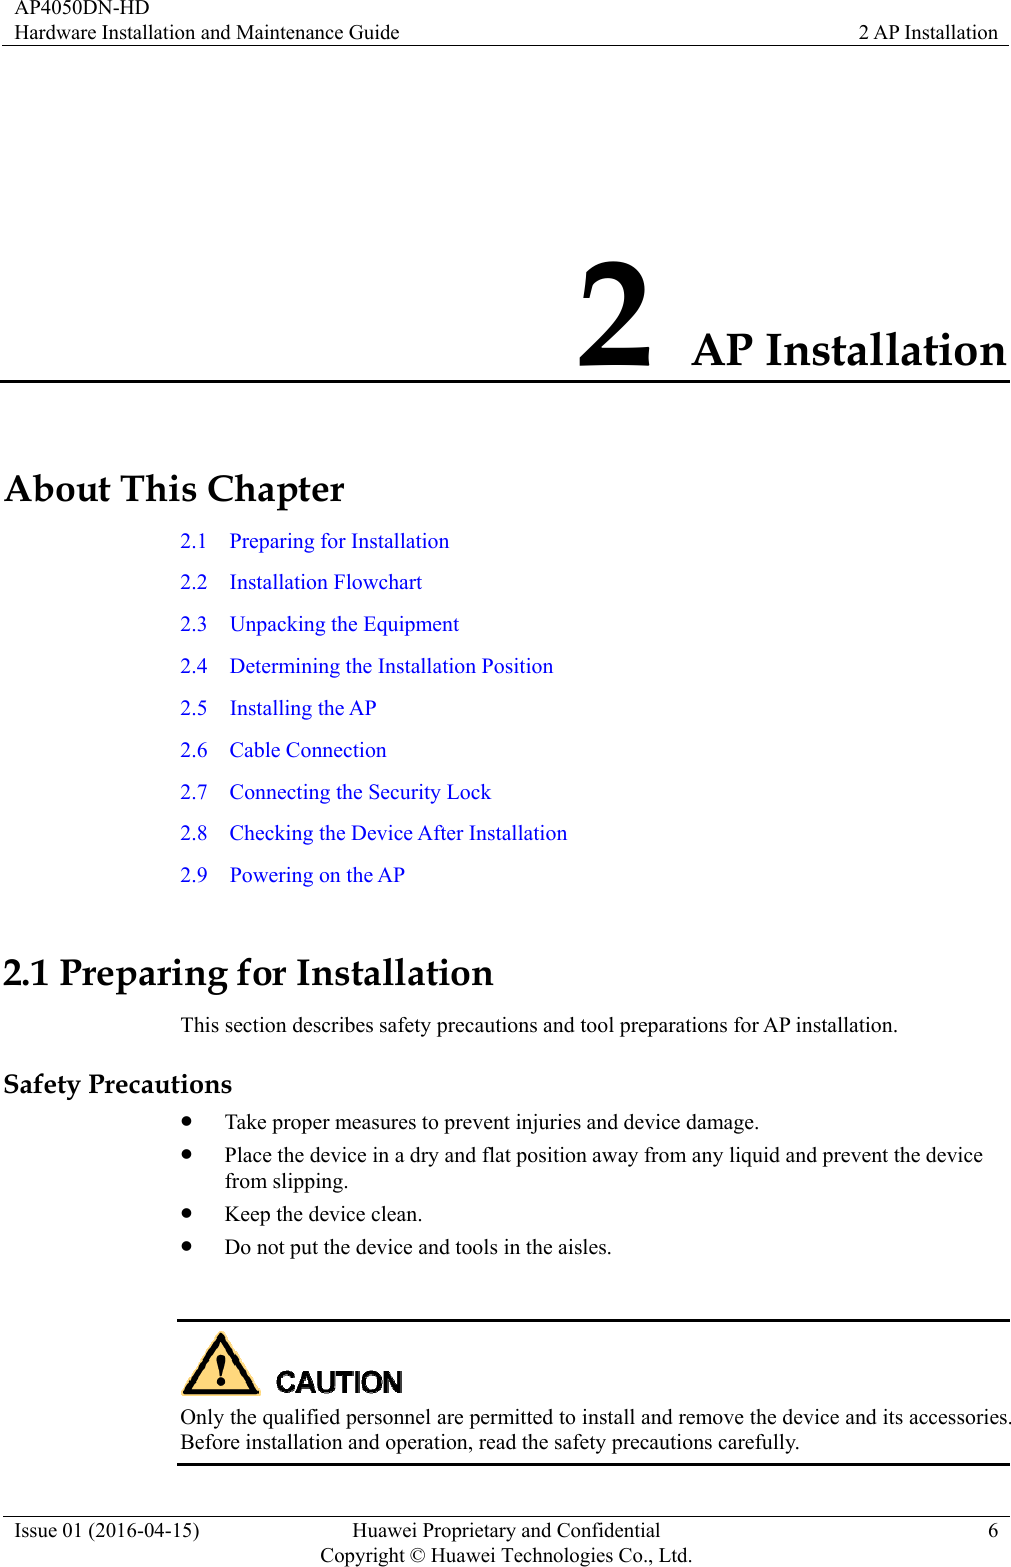 AP4050DN-HD Hardware Installation and Maintenance Guide  2 AP Installation Issue 01 (2016-04-15)  Huawei Proprietary and Confidential         Copyright © Huawei Technologies Co., Ltd.6 2 AP Installation About This Chapter 2.1  Preparing for Installation 2.2  Installation Flowchart 2.3  Unpacking the Equipment 2.4  Determining the Installation Position 2.5  Installing the AP 2.6  Cable Connection 2.7    Connecting the Security Lock 2.8    Checking the Device After Installation 2.9  Powering on the AP 2.1 Preparing for Installation This section describes safety precautions and tool preparations for AP installation. Safety Precautions  Take proper measures to prevent injuries and device damage.    Place the device in a dry and flat position away from any liquid and prevent the device from slipping.  Keep the device clean.  Do not put the device and tools in the aisles.   Only the qualified personnel are permitted to install and remove the device and its accessories. Before installation and operation, read the safety precautions carefully.   